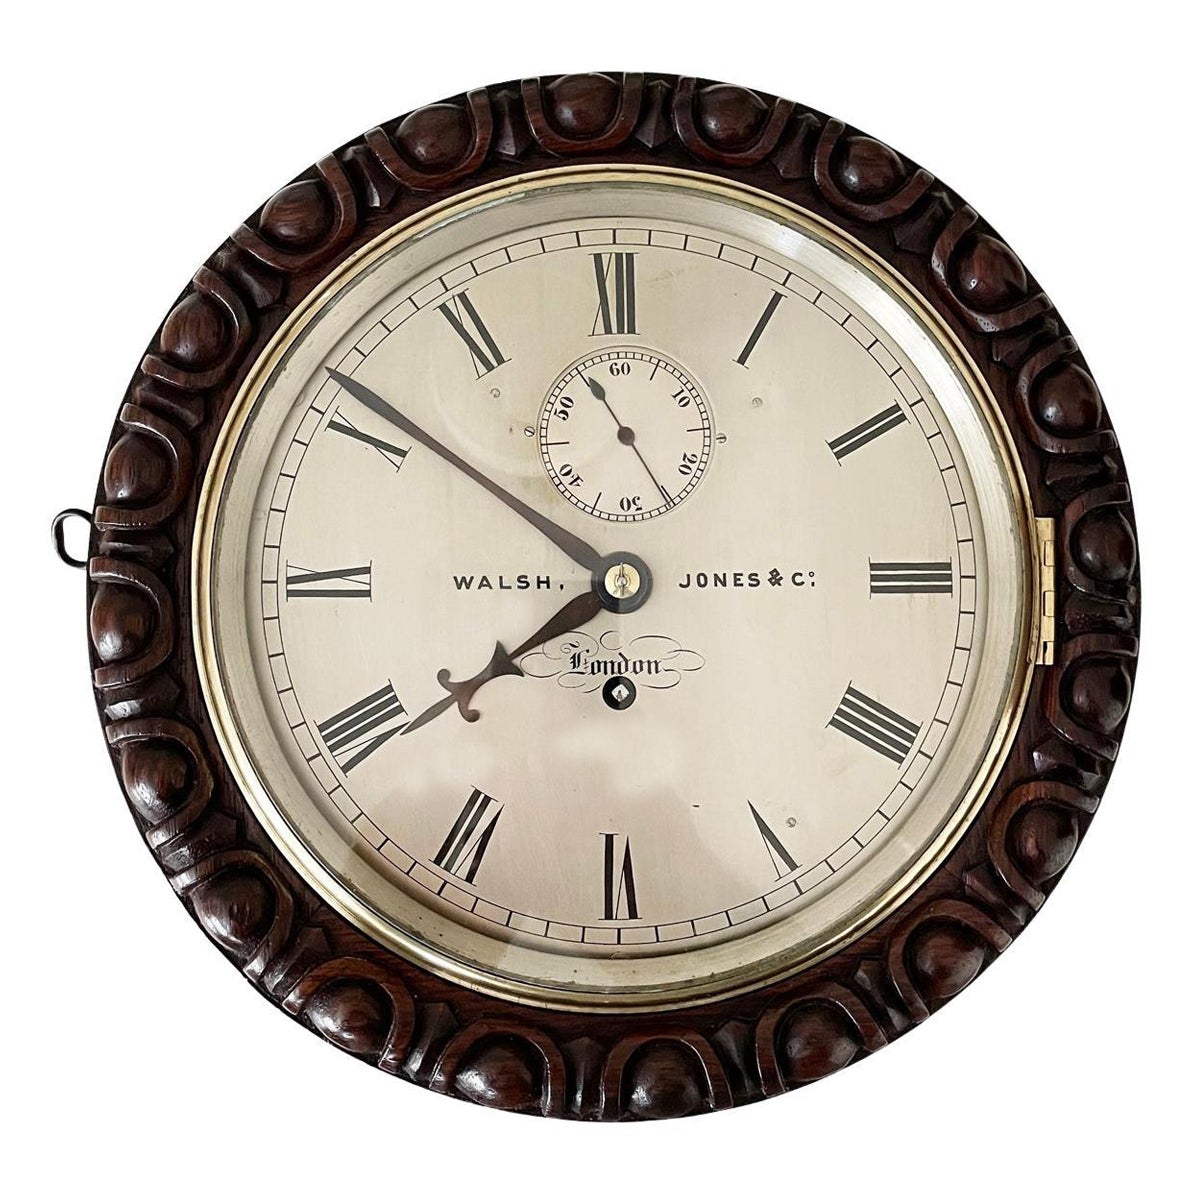 Rare Marine Oak Cased Wall Clock Retailed by Walsh Jones & Co Melbourne, 19th C